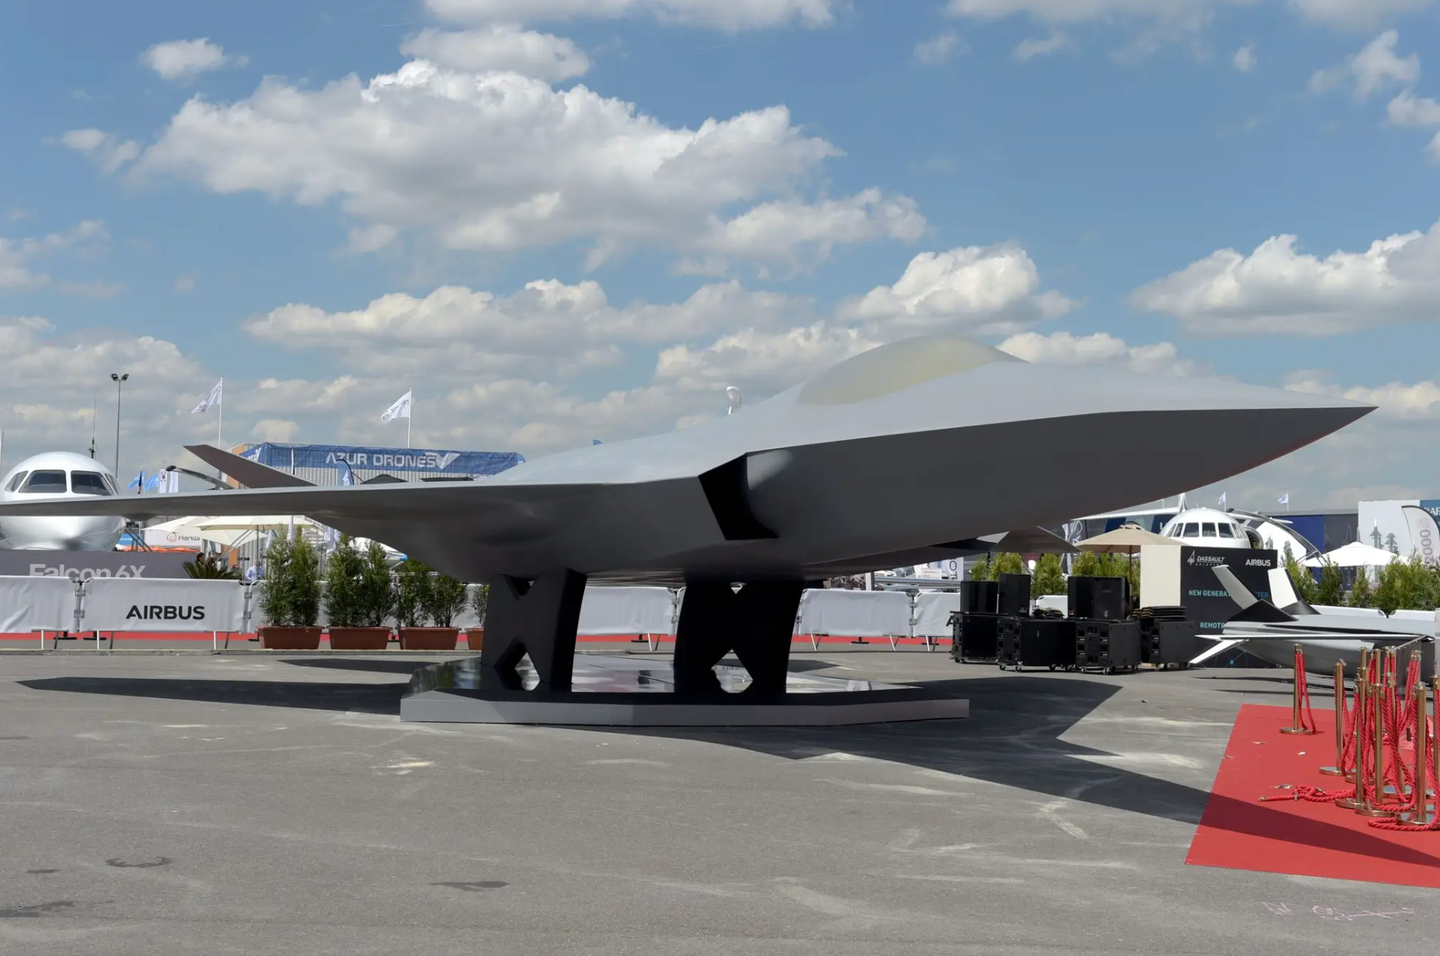 The full-scale model of the NGF that was presented on the Dassault Aviation static display on the first day of the 53rd International Paris Air Show in June 2019.&nbsp;<em>ERIC PIERMONT/AFP via Getty Images</em>